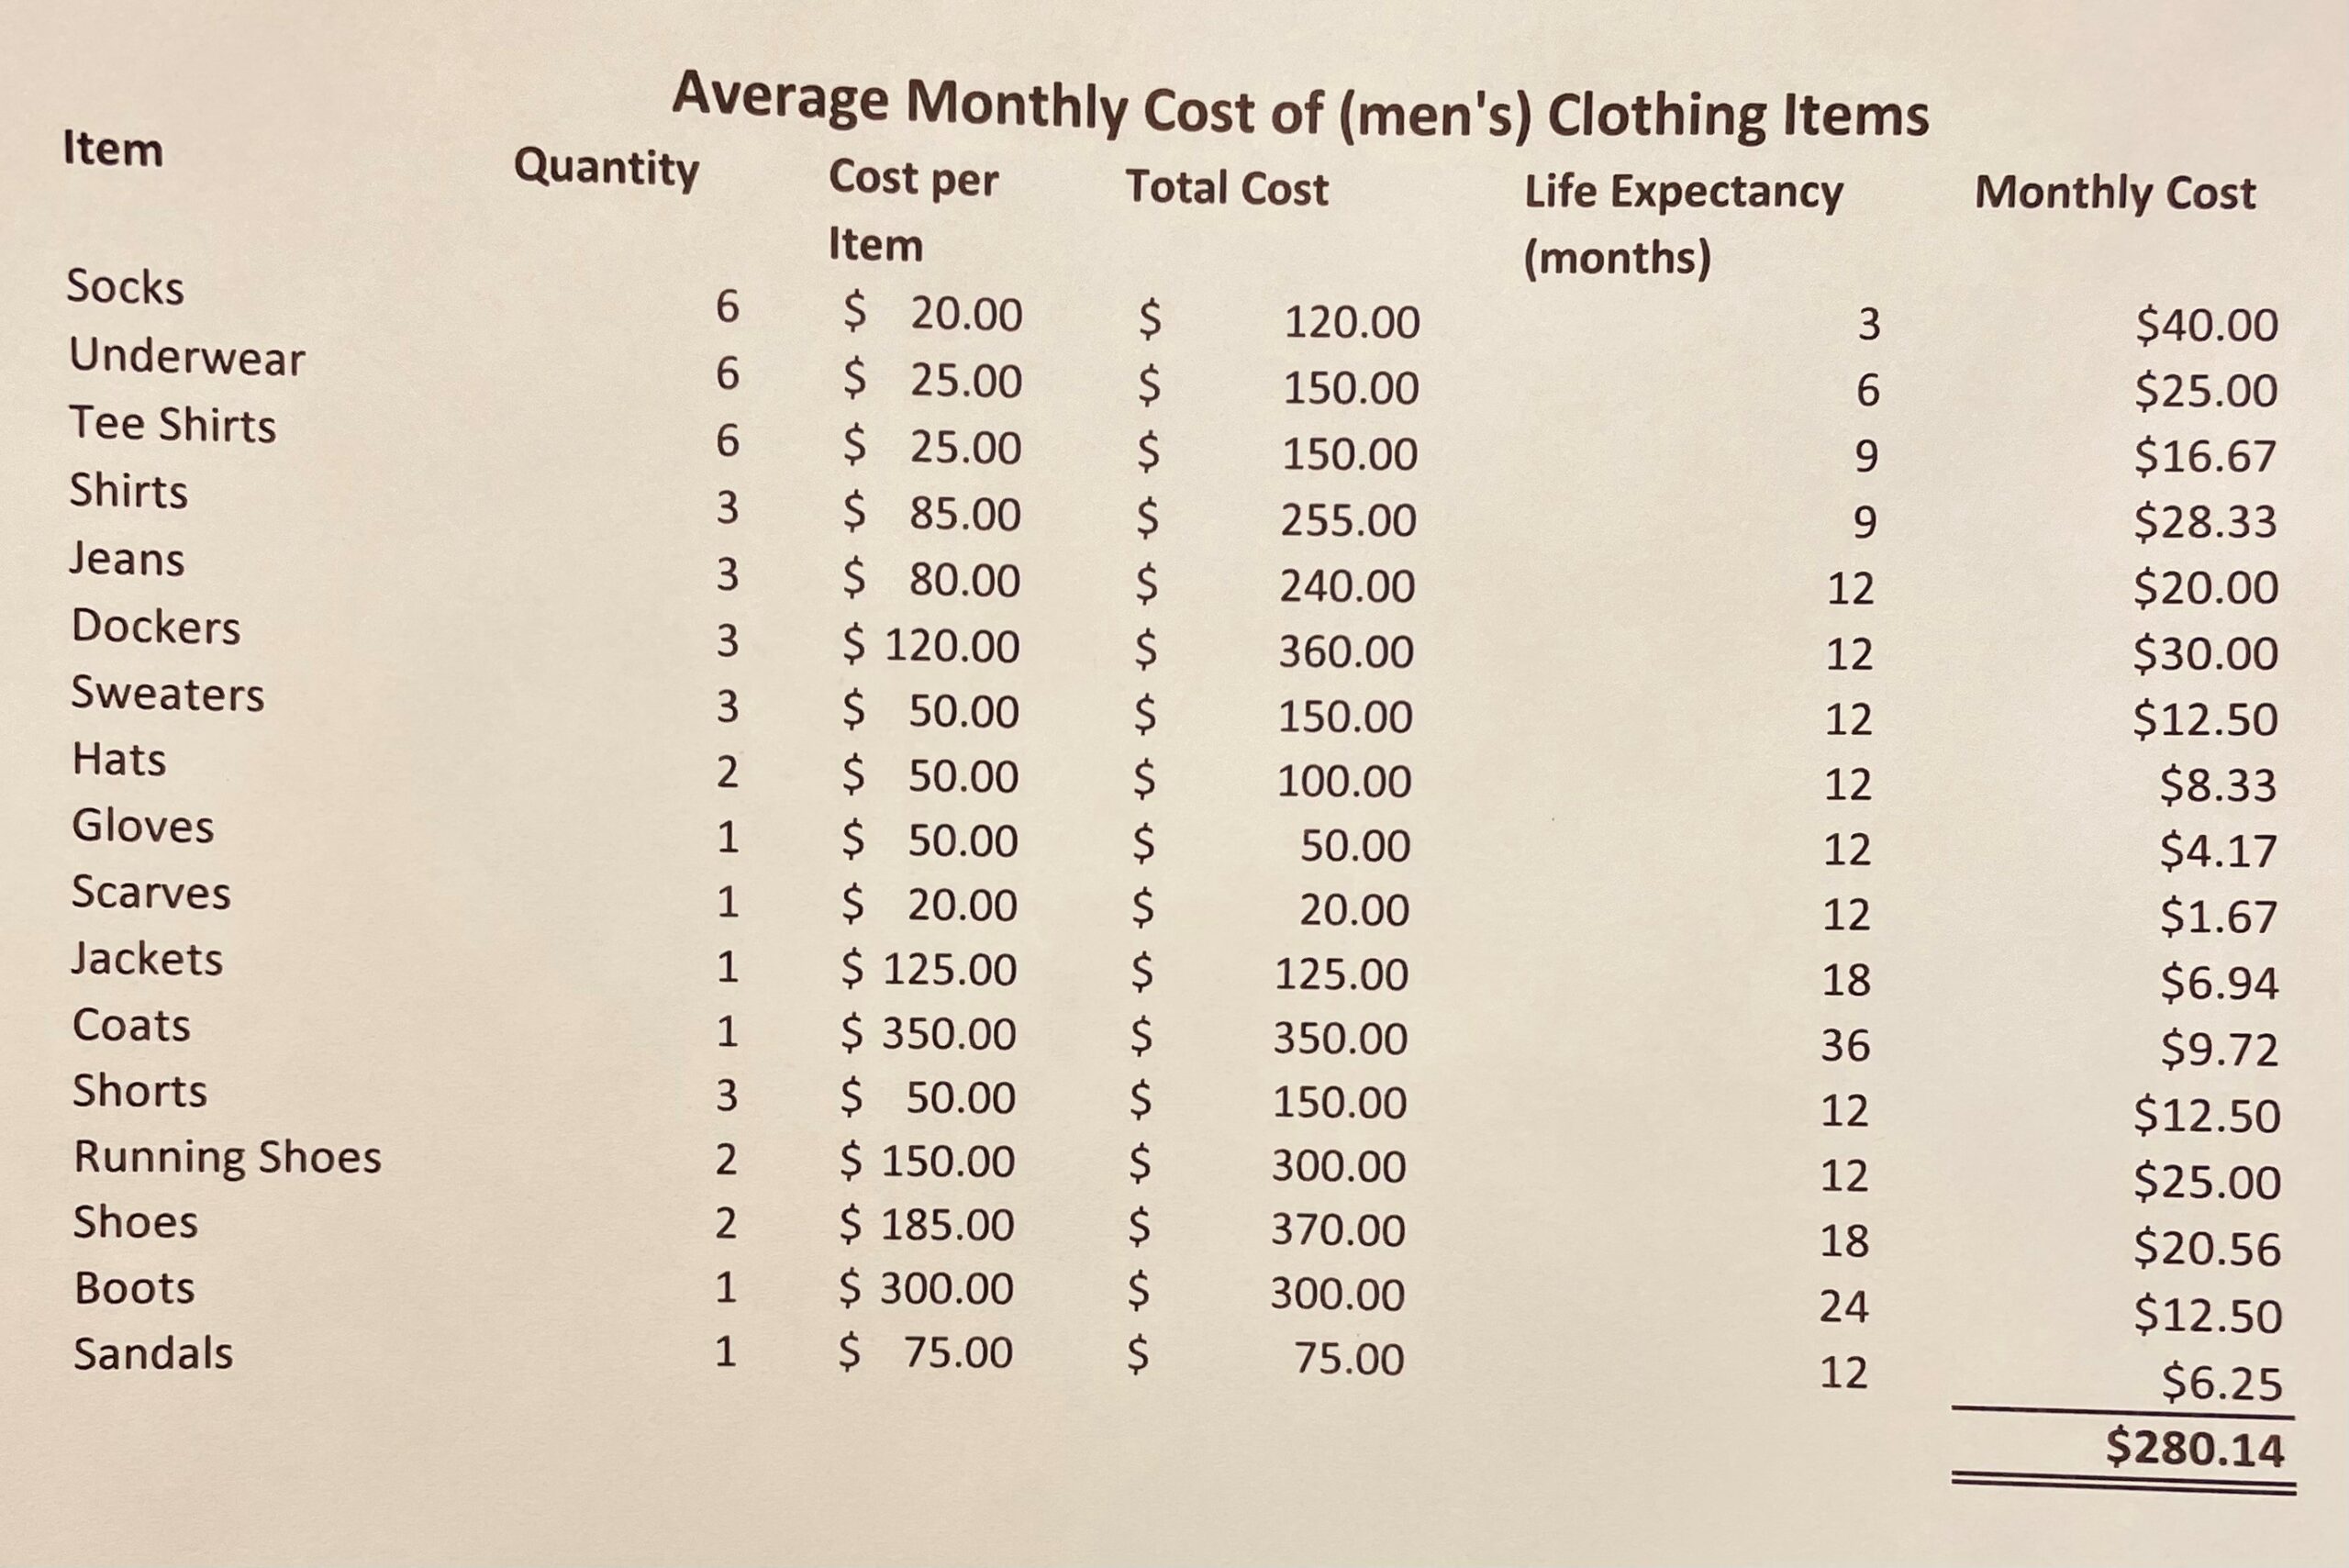 Average monthly cost of mens clothing